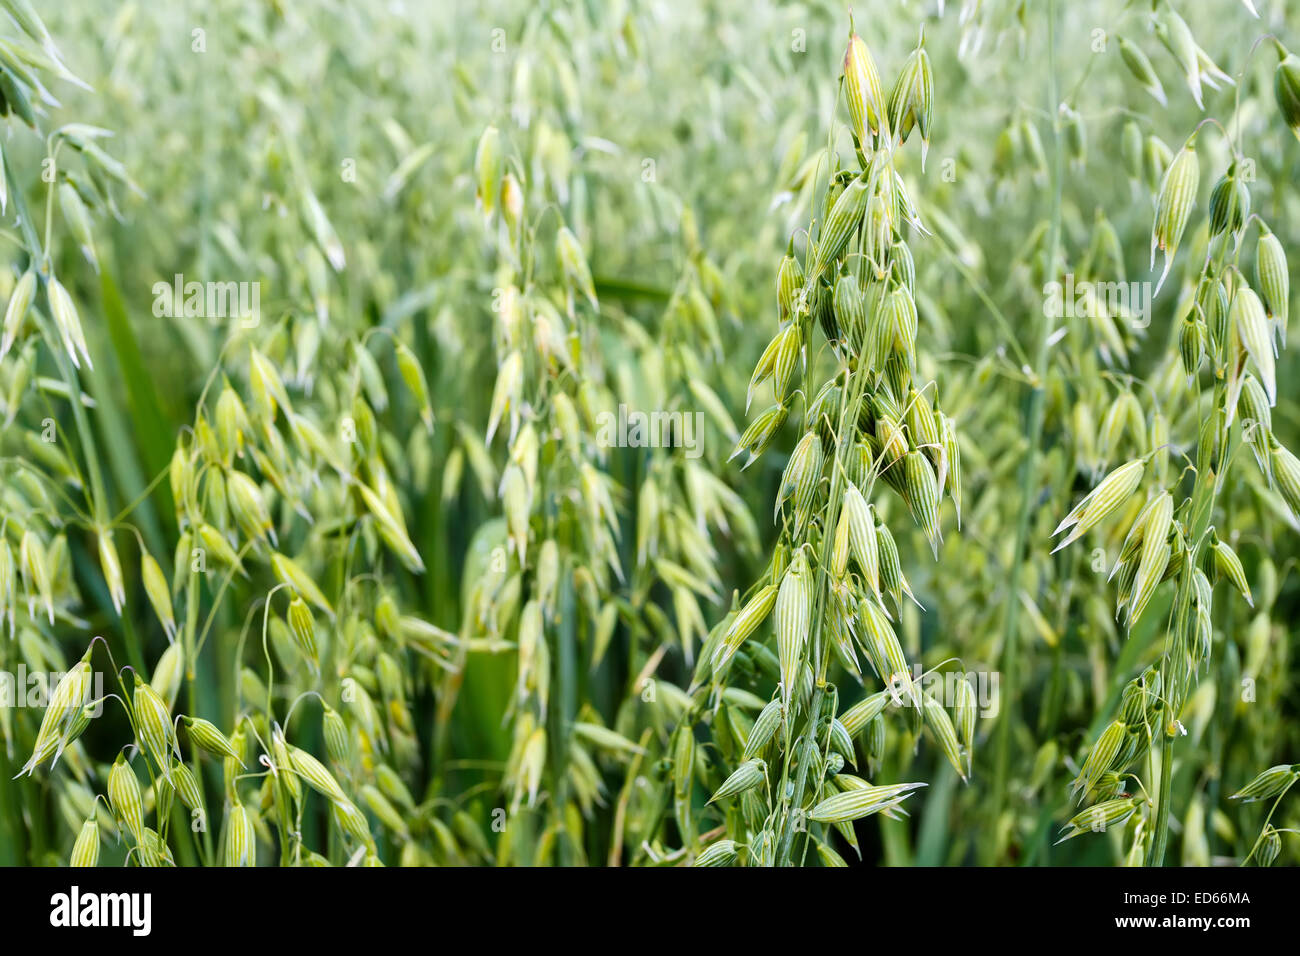 green oat grass growing in the field, with shallow focus Stock Photo